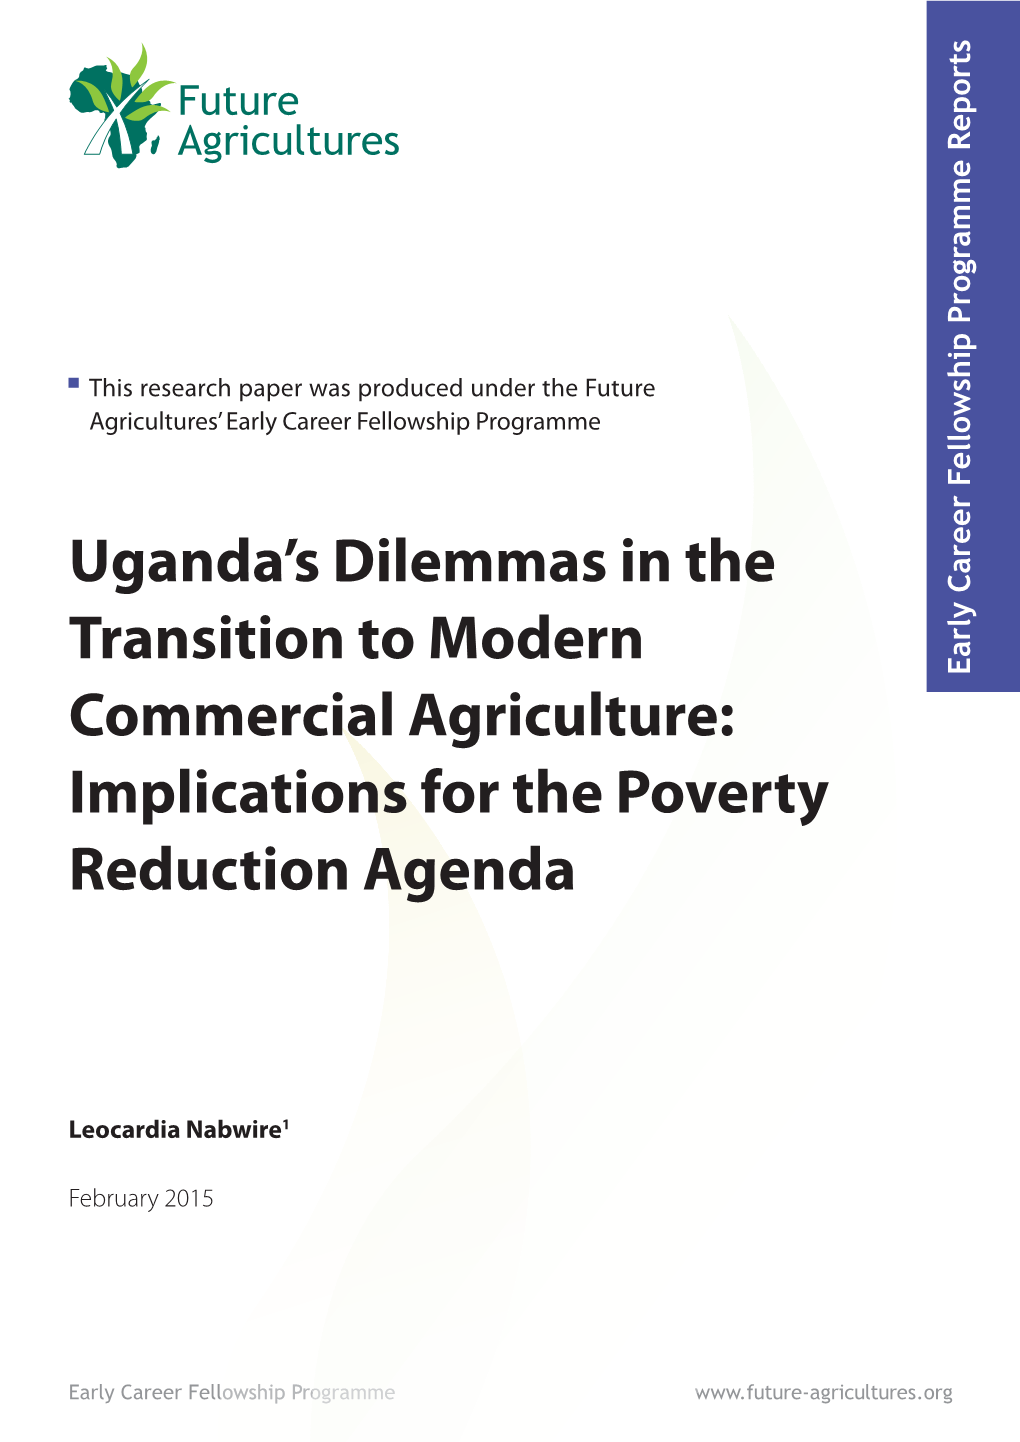 Uganda's Dilemmas in the Transition to Modern Commercial Agriculture